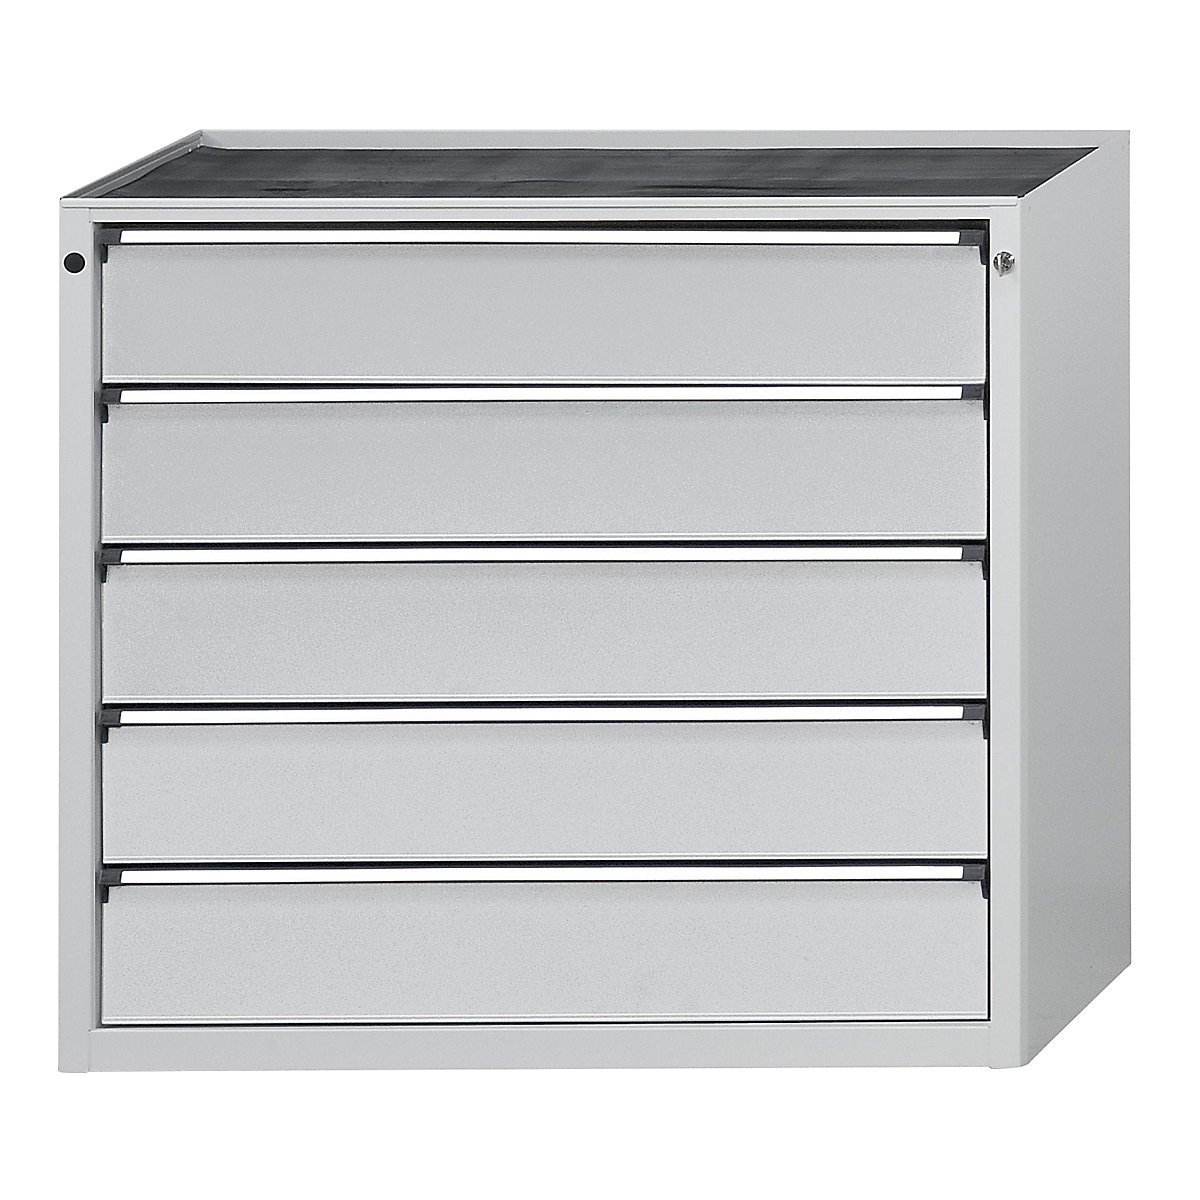 Drawer cupboard without worktop – ANKE, width 1060 mm, max. drawer load 200 kg, 5 drawers, front in light grey-5